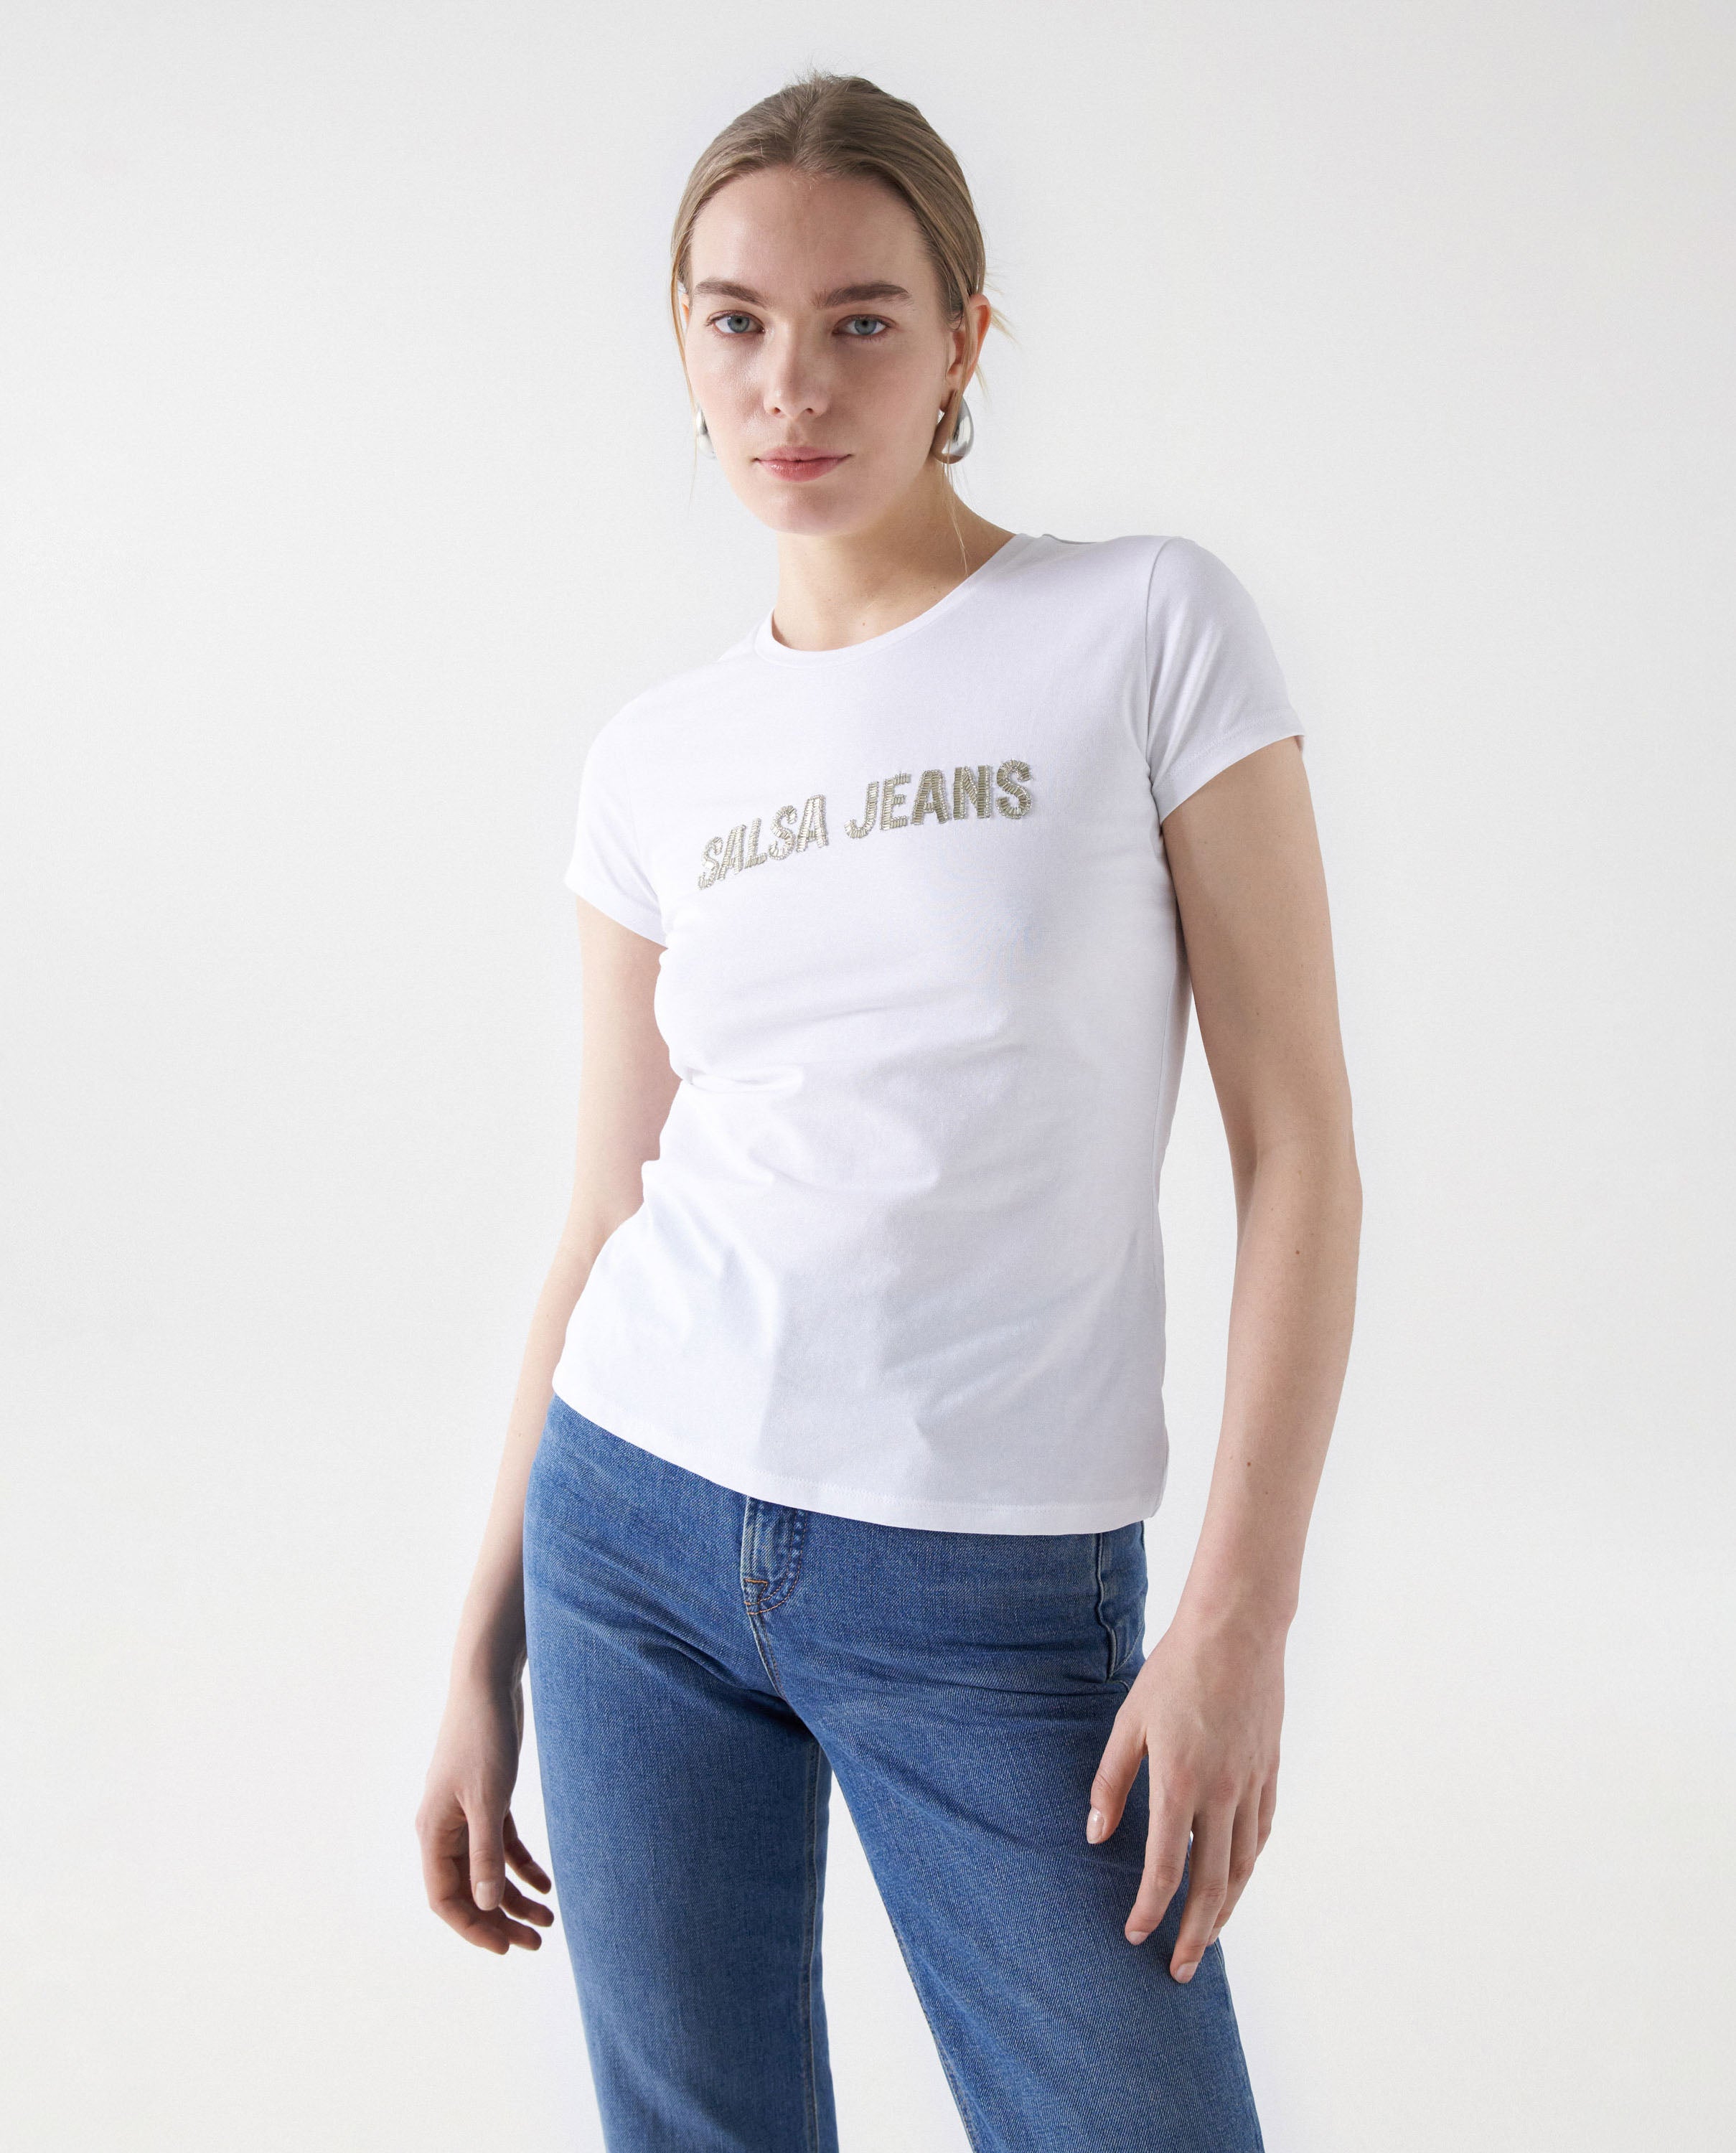 Beads Detail Branding T-Shirt in White T-Shirts Salsa Jeans   